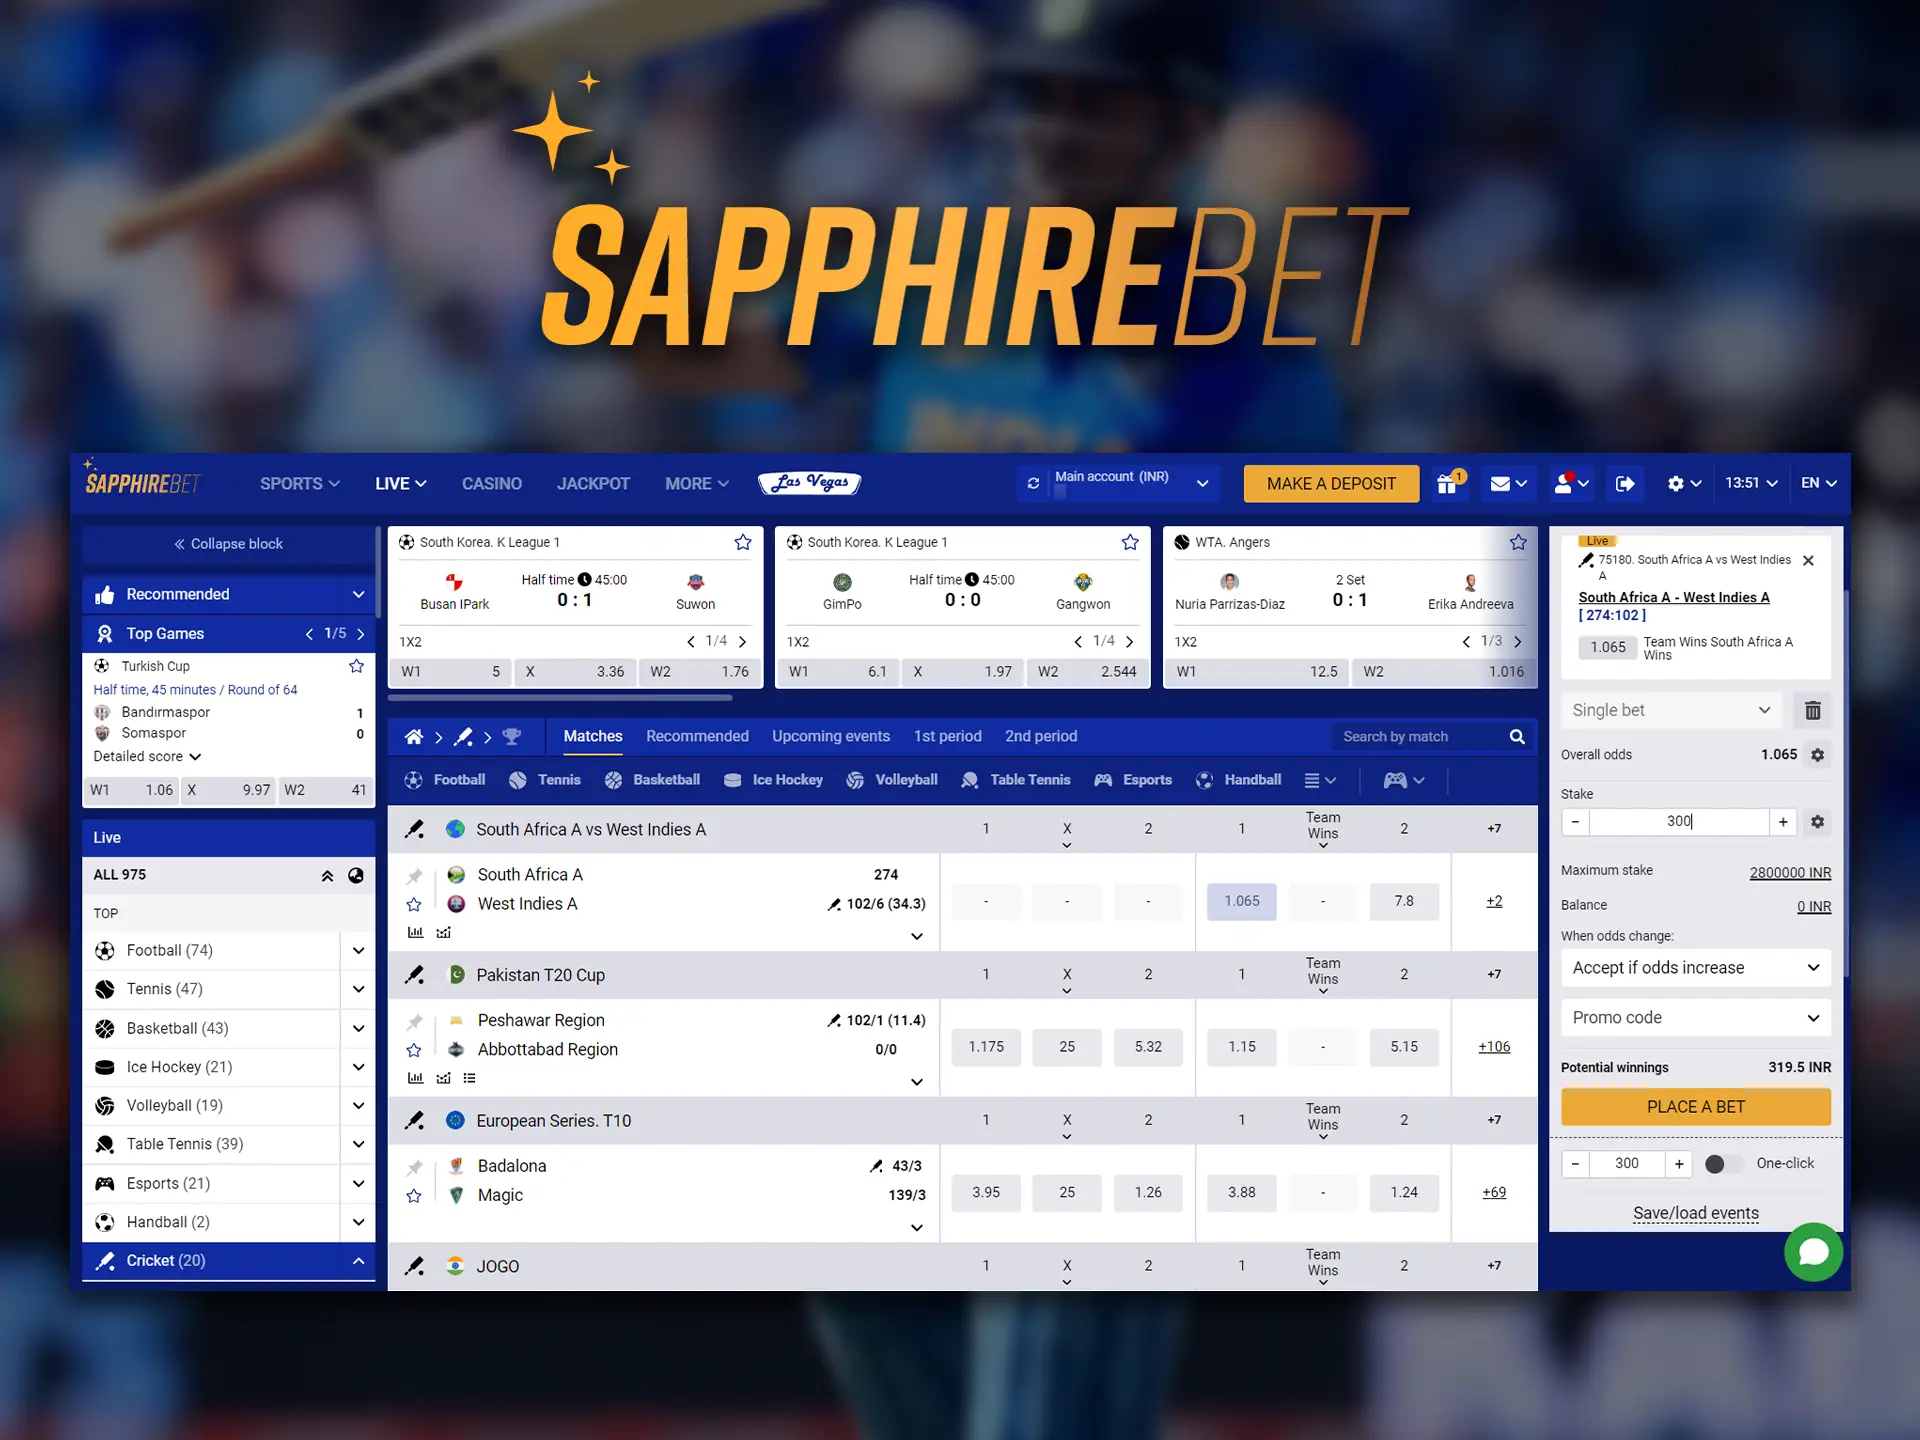 Sapphirebet offers legal cricket betting from their website or mobile app.